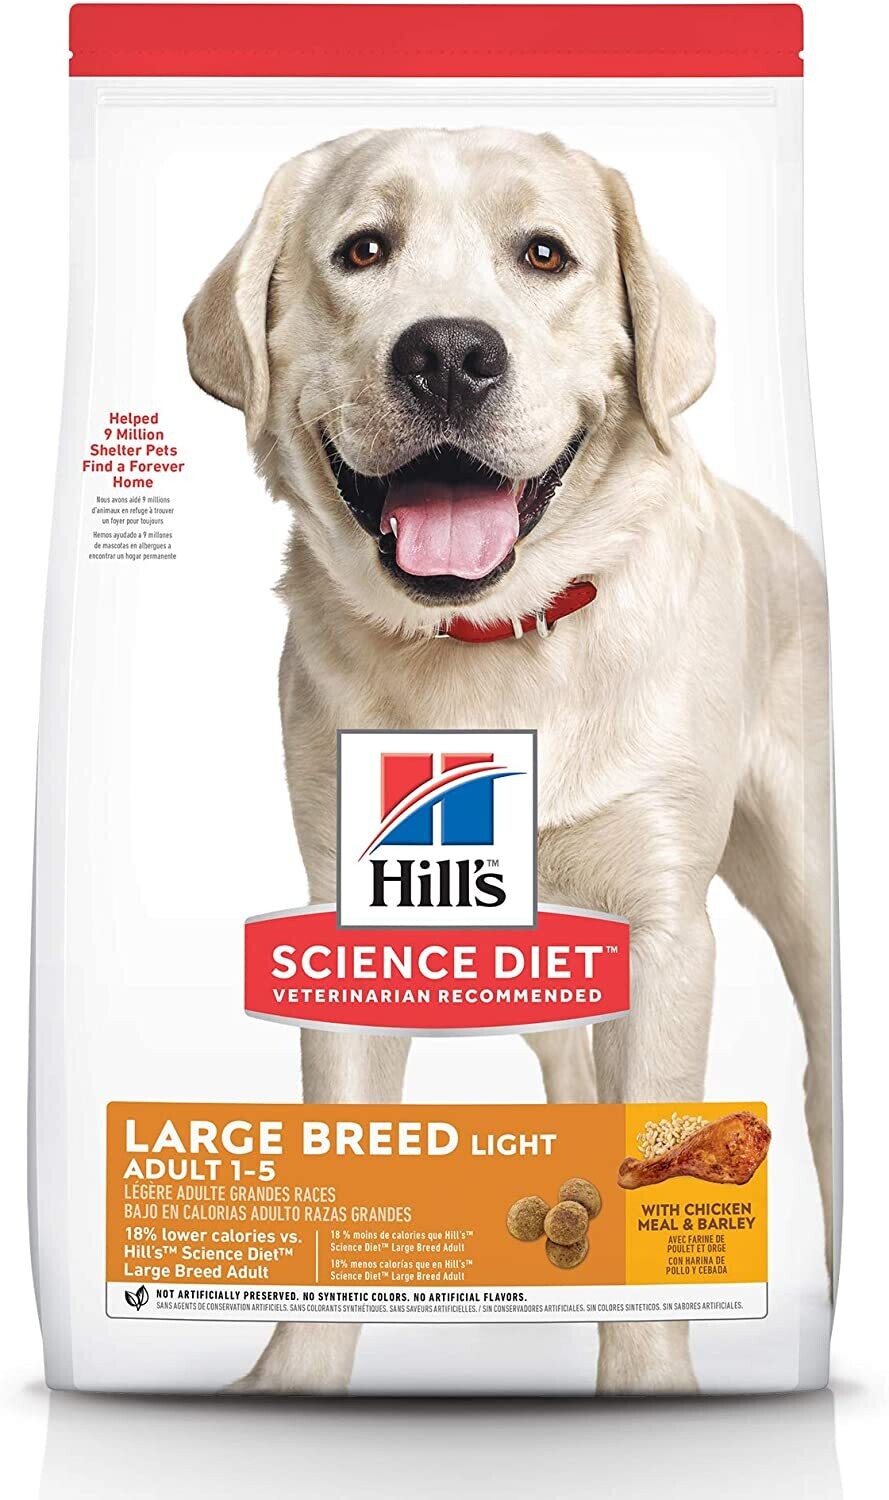 HILL'S SCIENCE DIET LARGE BREED ADULT LIGHT 30LB